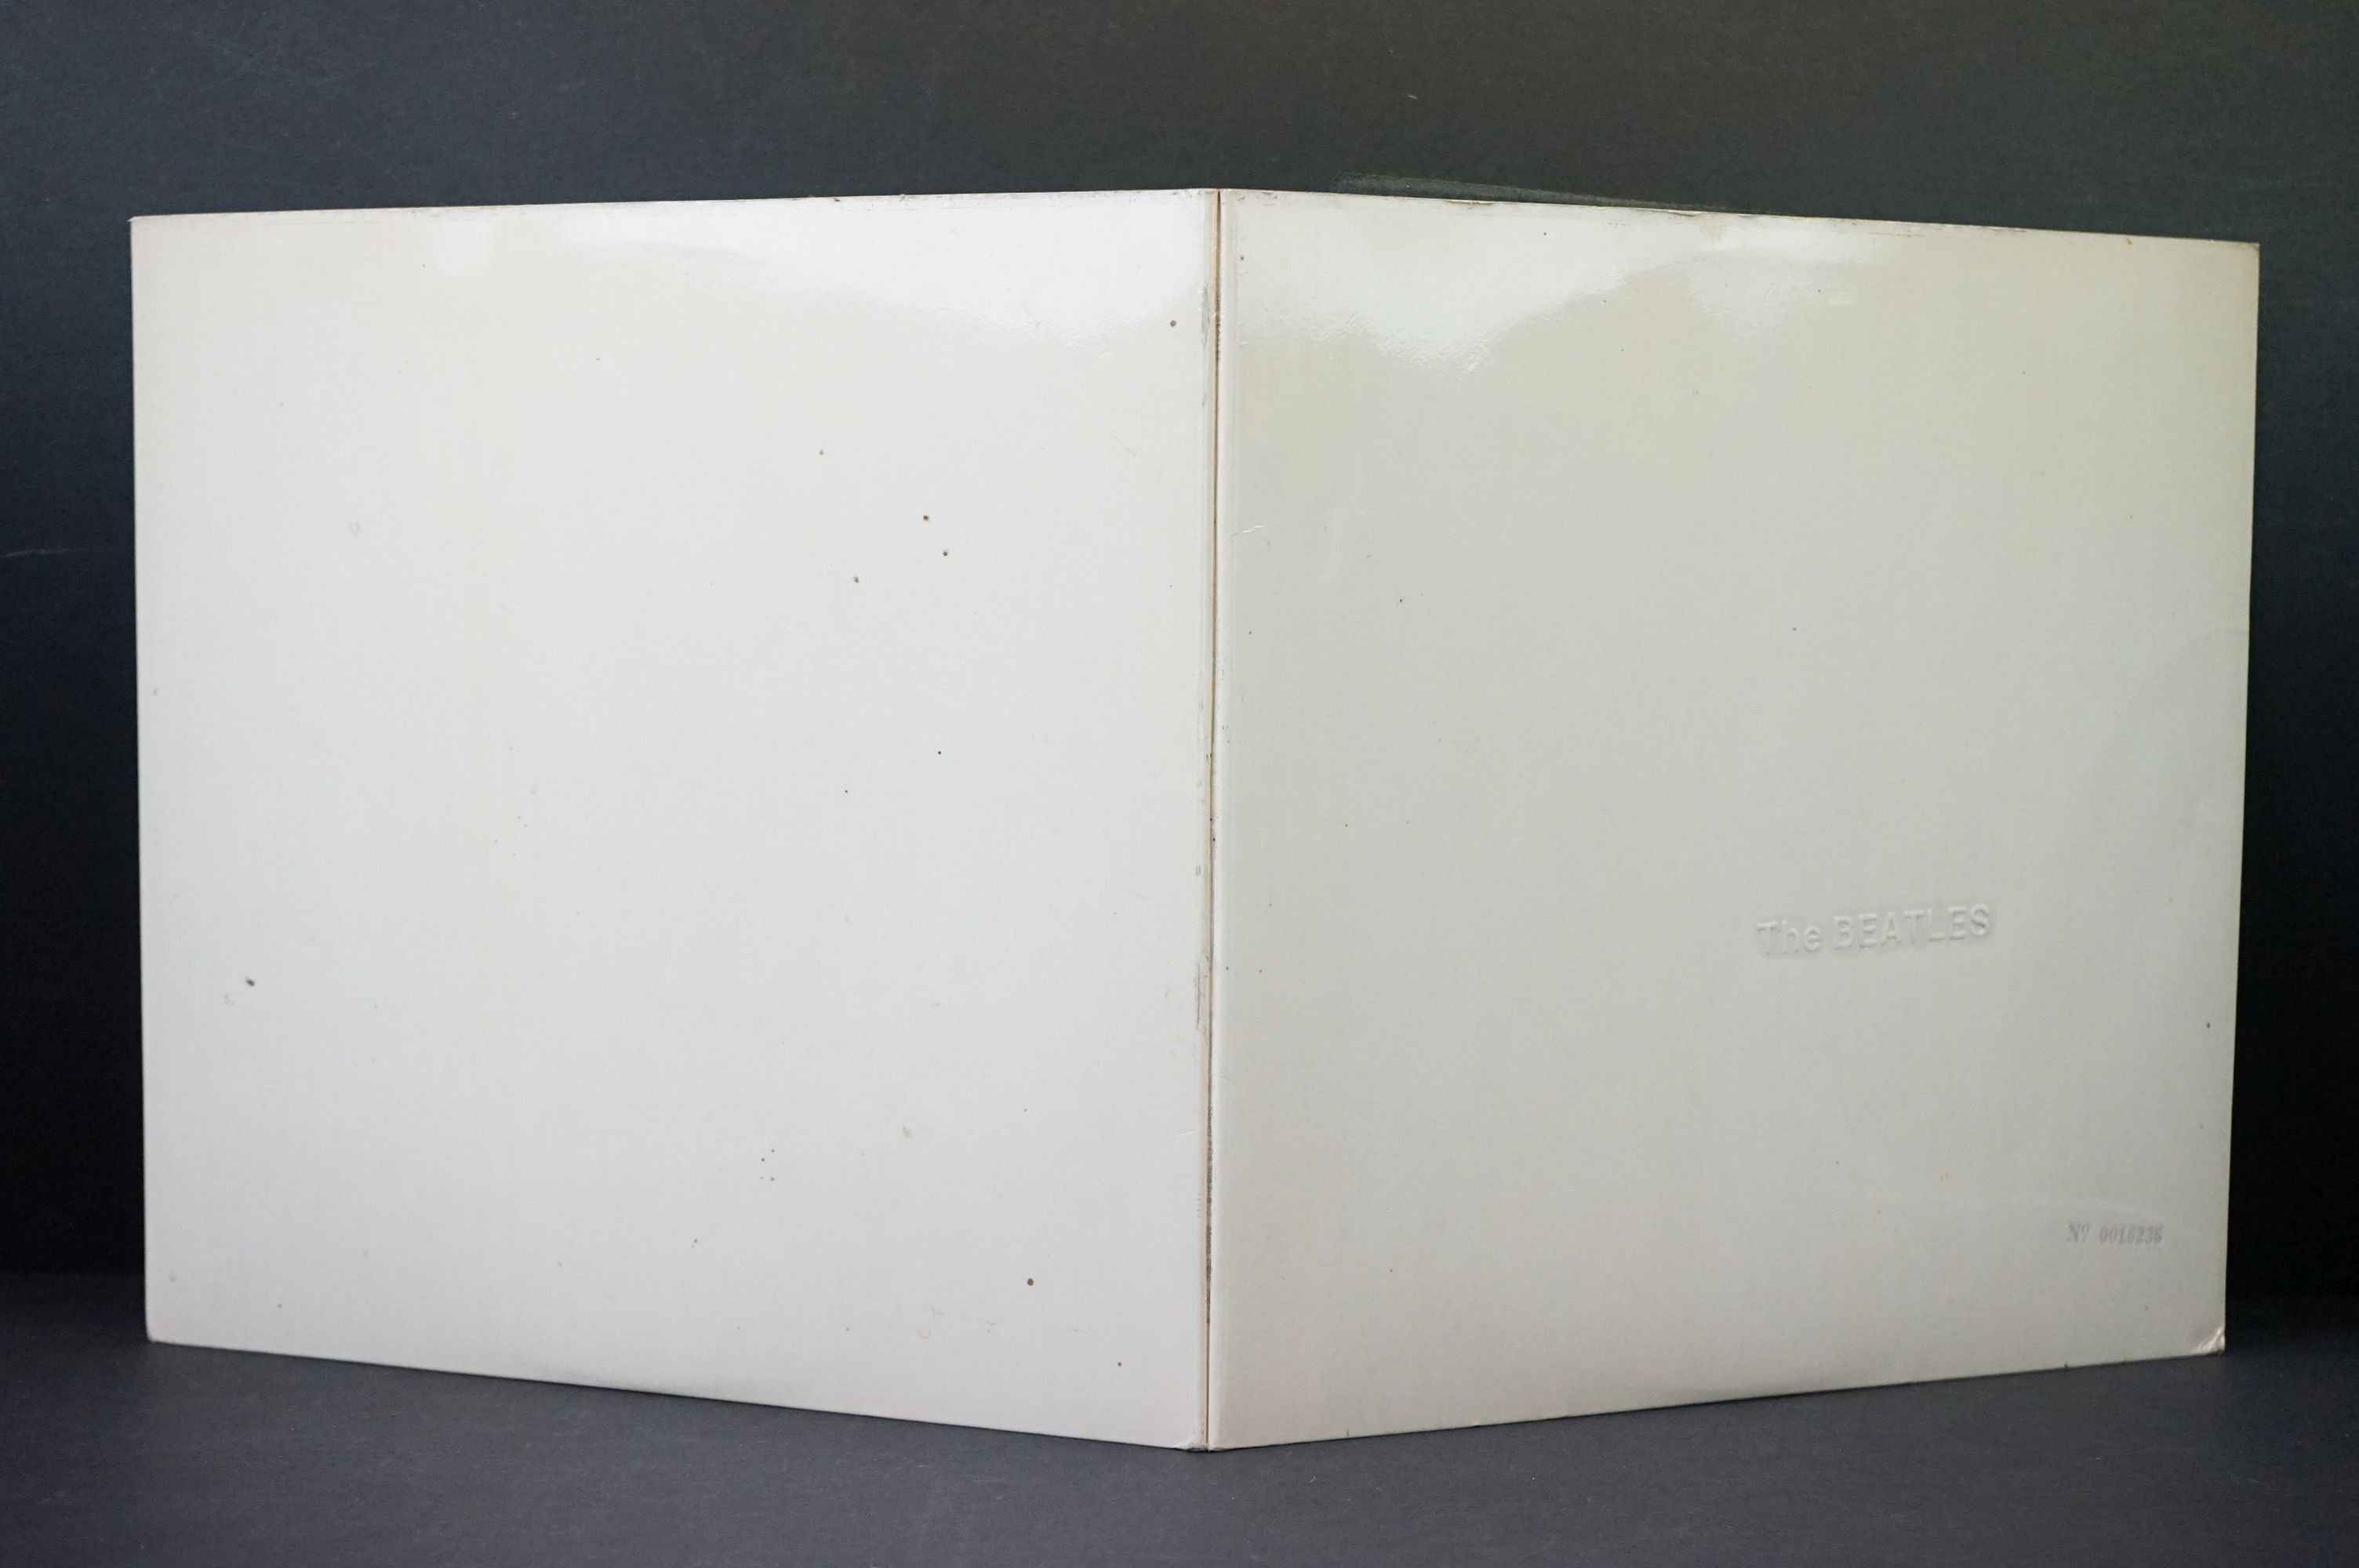 Vinyl - The Beatles White Album PCS 7067/8 low number 0016236. 4 photos and poster present. Sleeve - Image 9 of 9